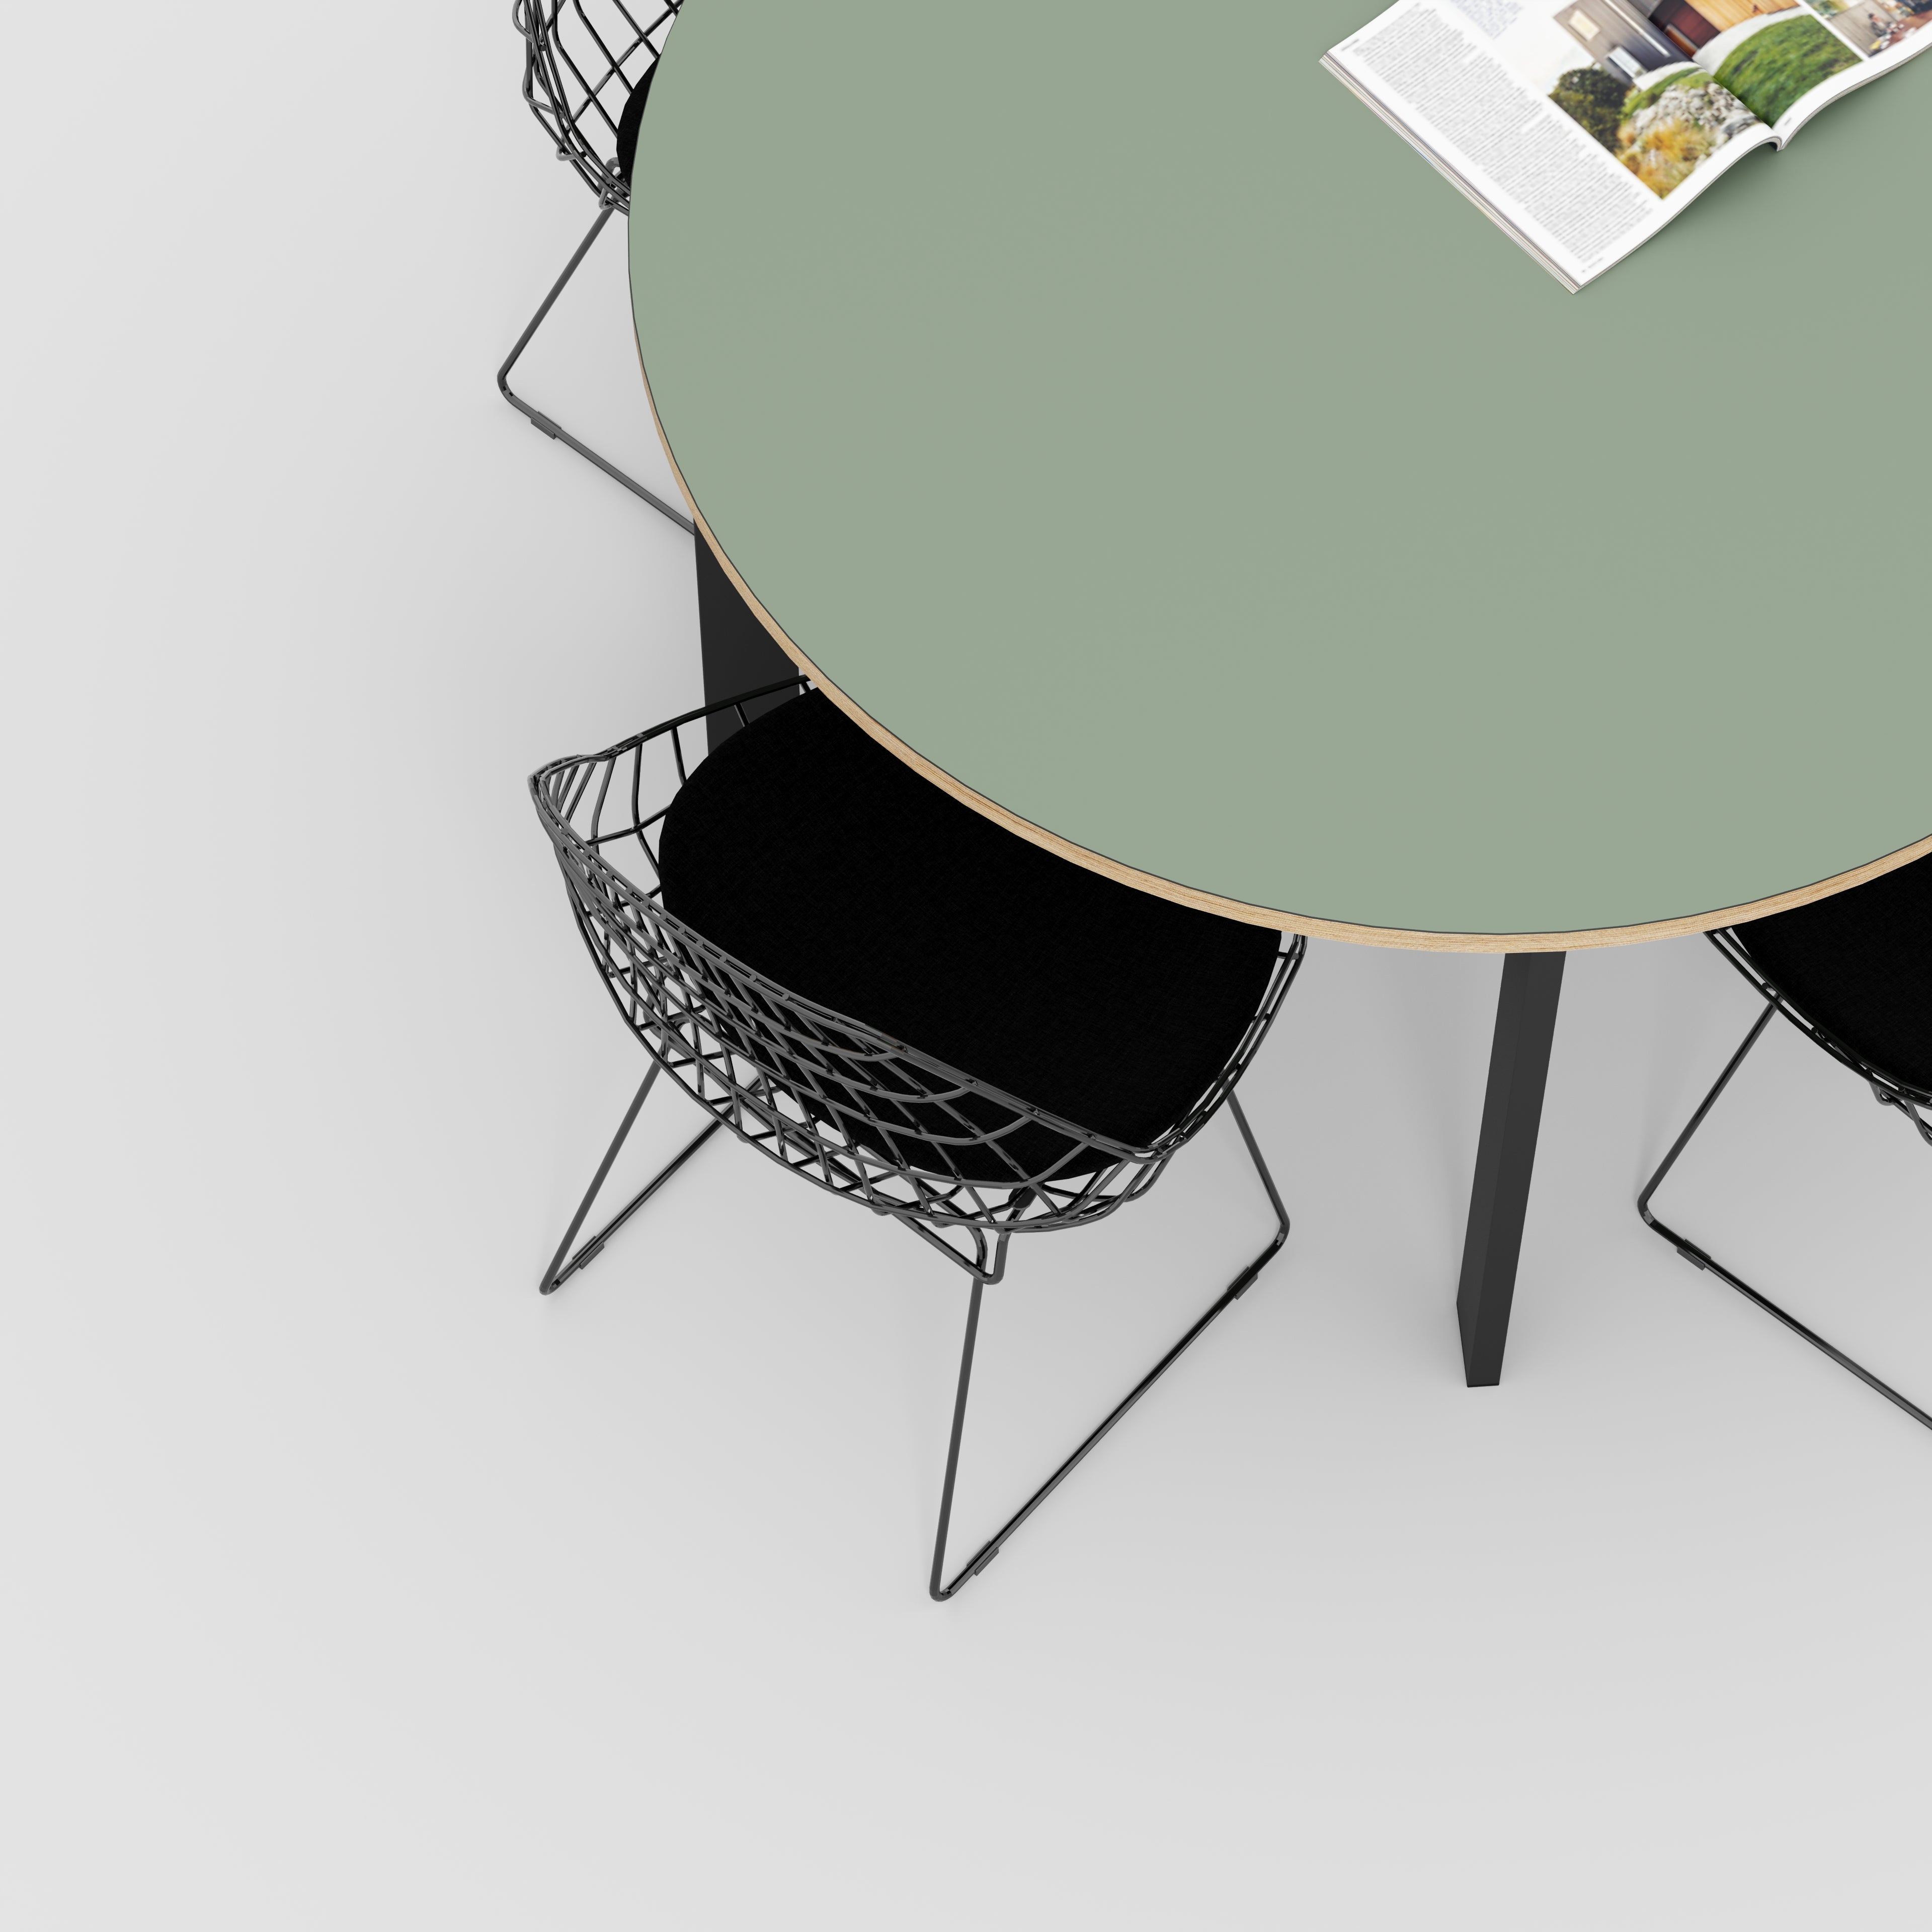 Round Table with Black Rectangular Single Pin Legs - Formica Green Slate - 1200(dia) x 735(h)